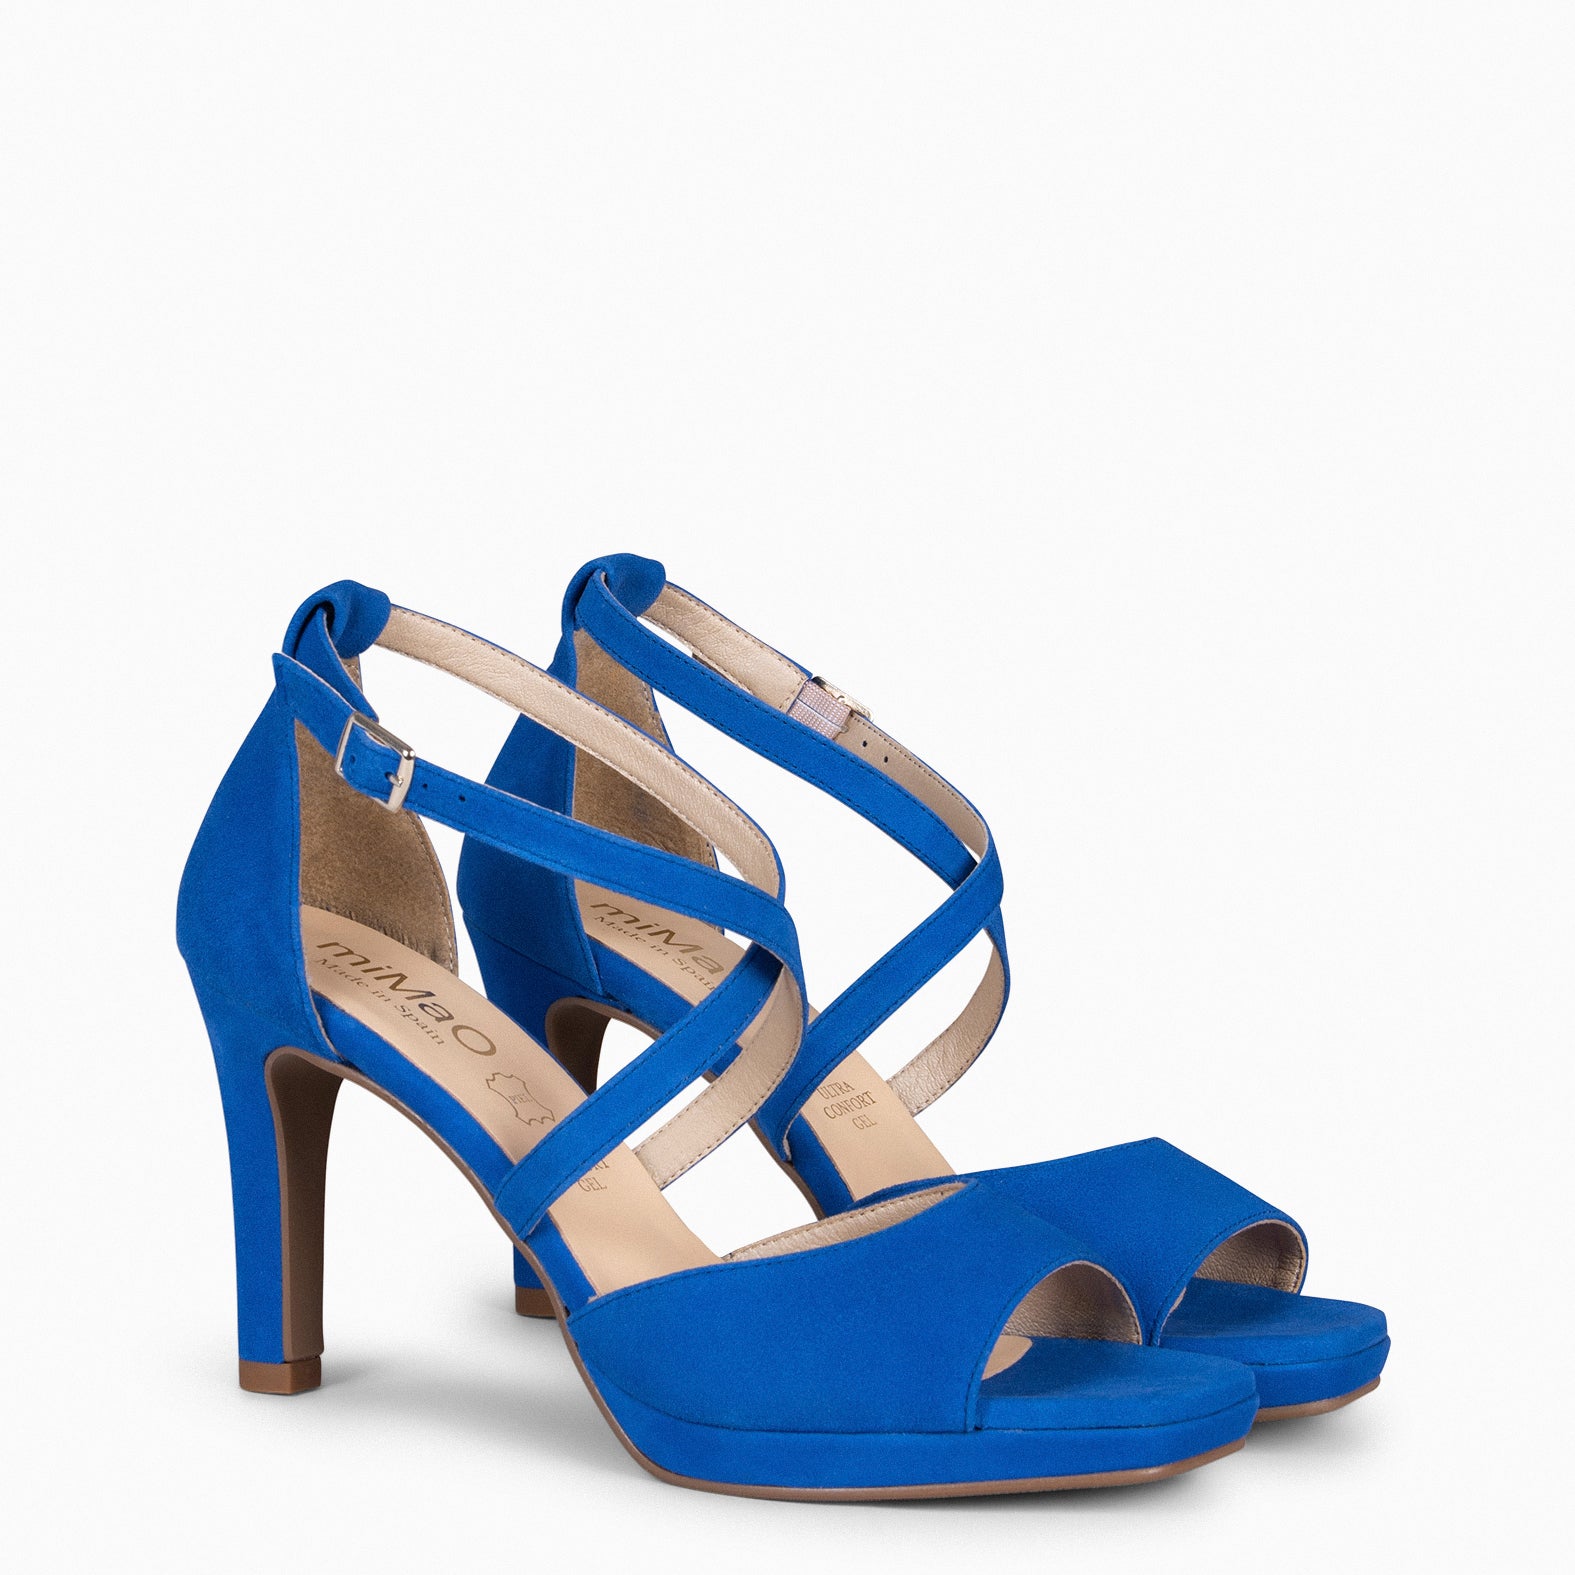 ROSSA - BLUE party sandals with heel